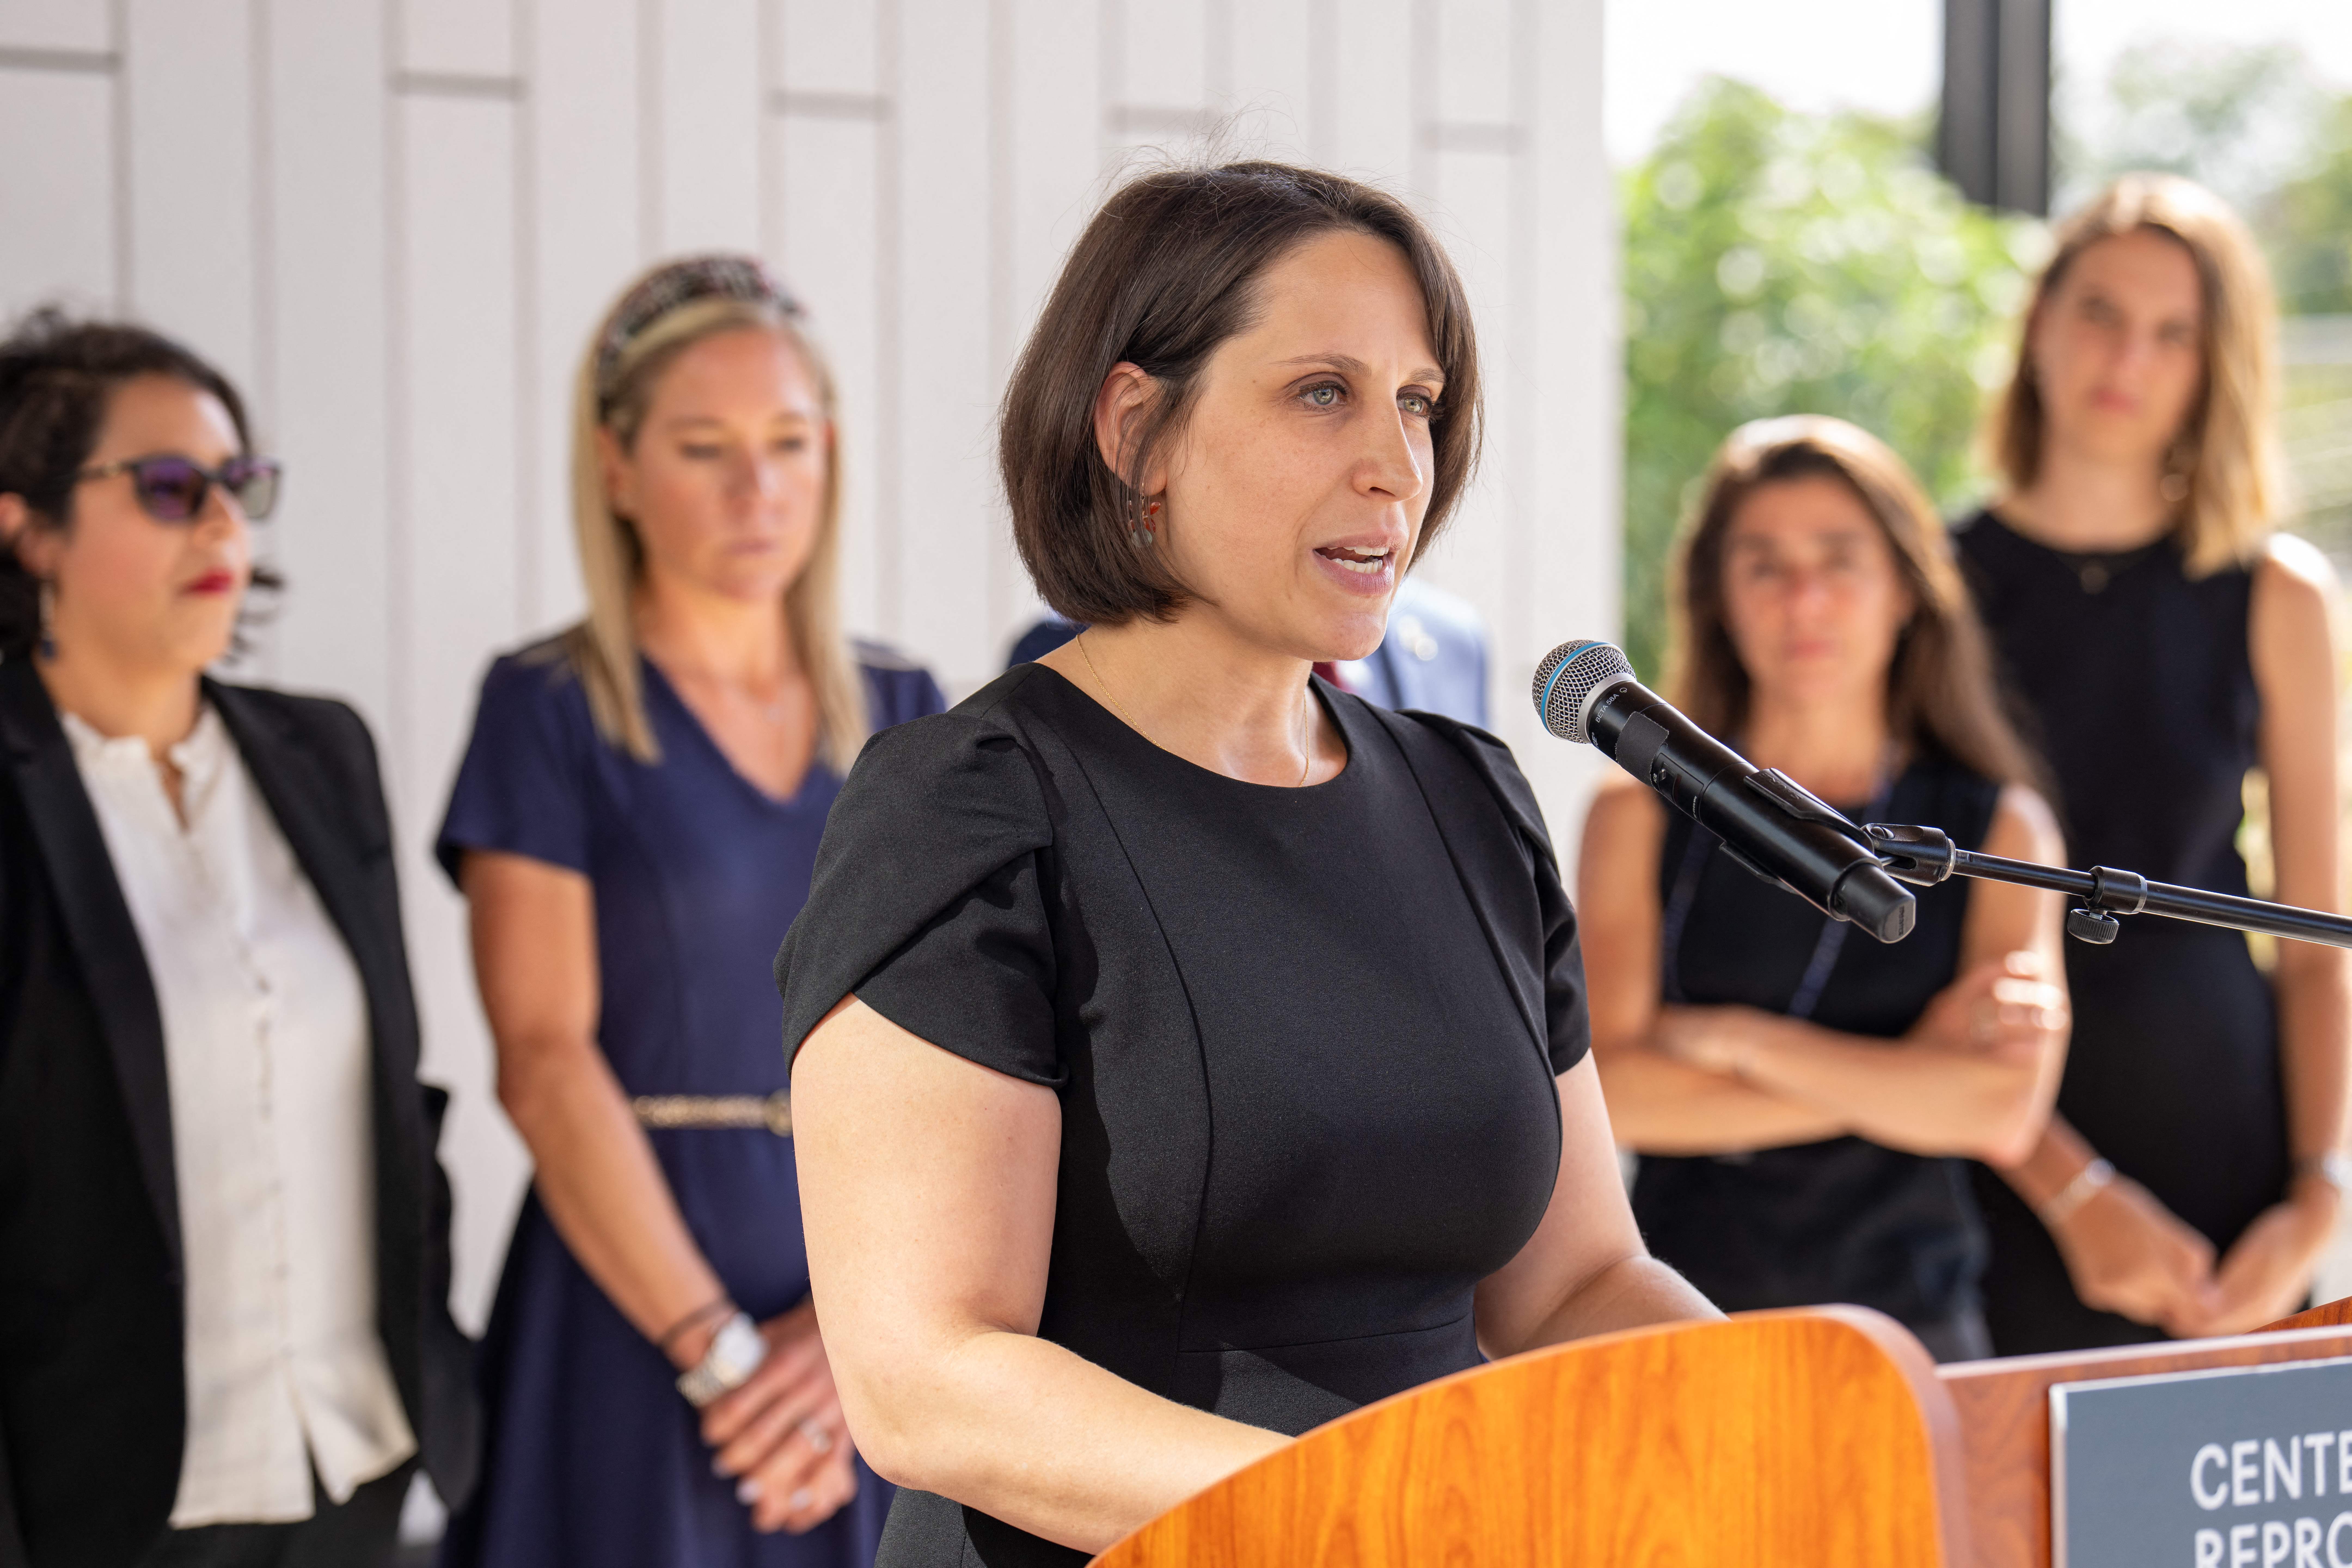 Molly Duane stands before a wooden podium and speaks into a microphone, wearing a black top, and flanked by several other women. 